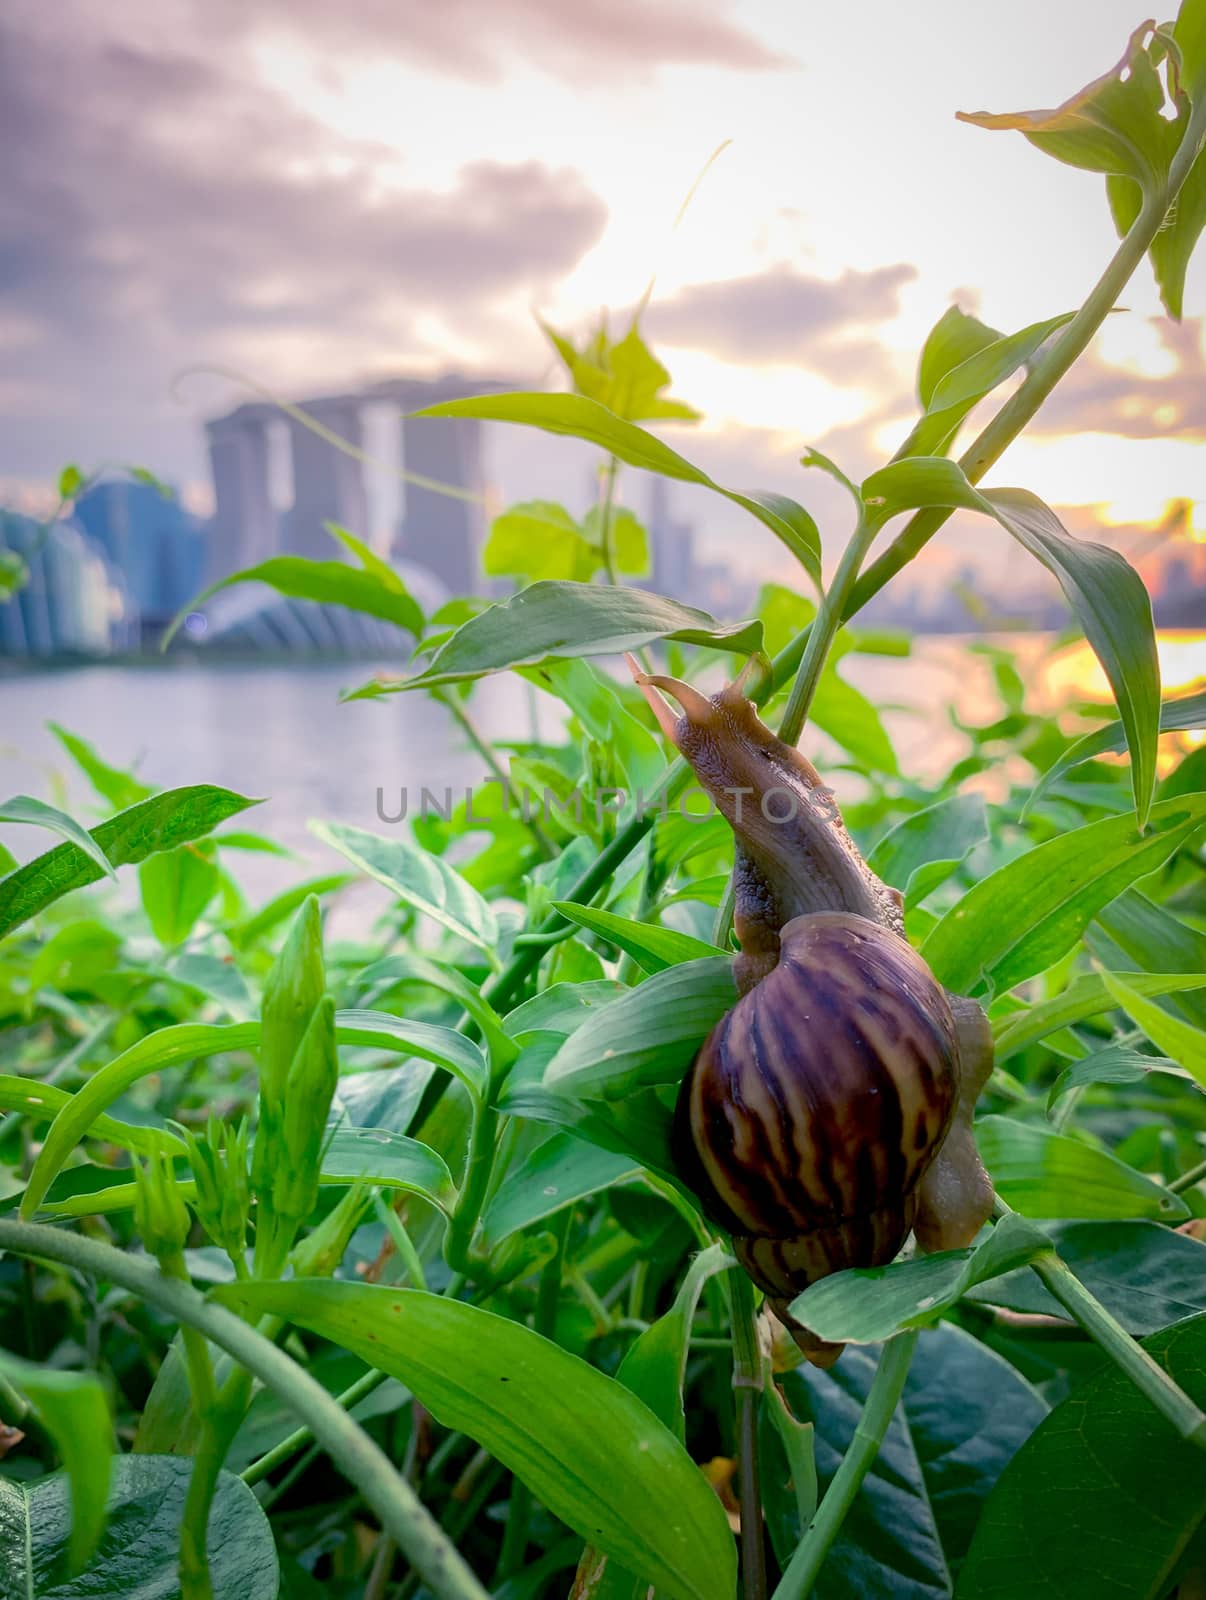 Snail climbing on plant in the evening beside the river opposite by Fahroni